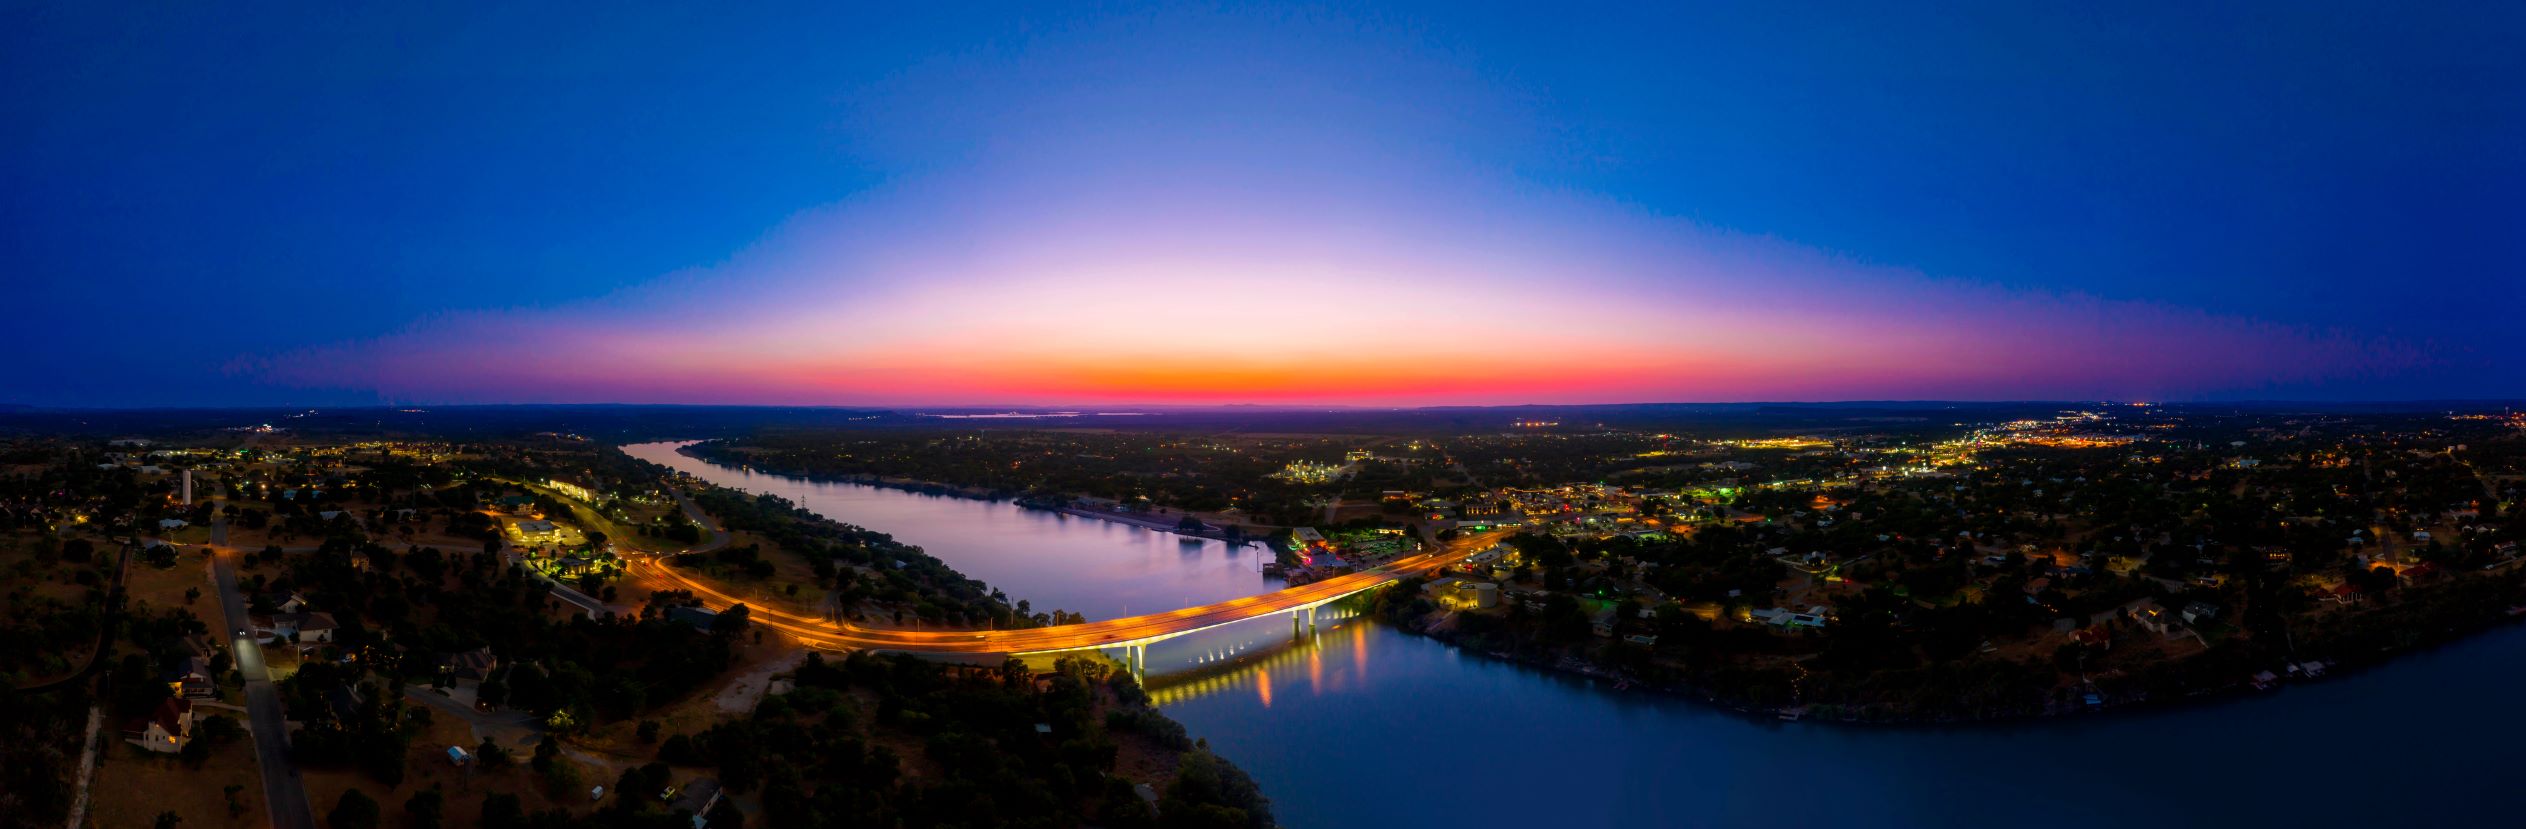 A gorgeous sunset falls on the bridge over Lake Marble Falls